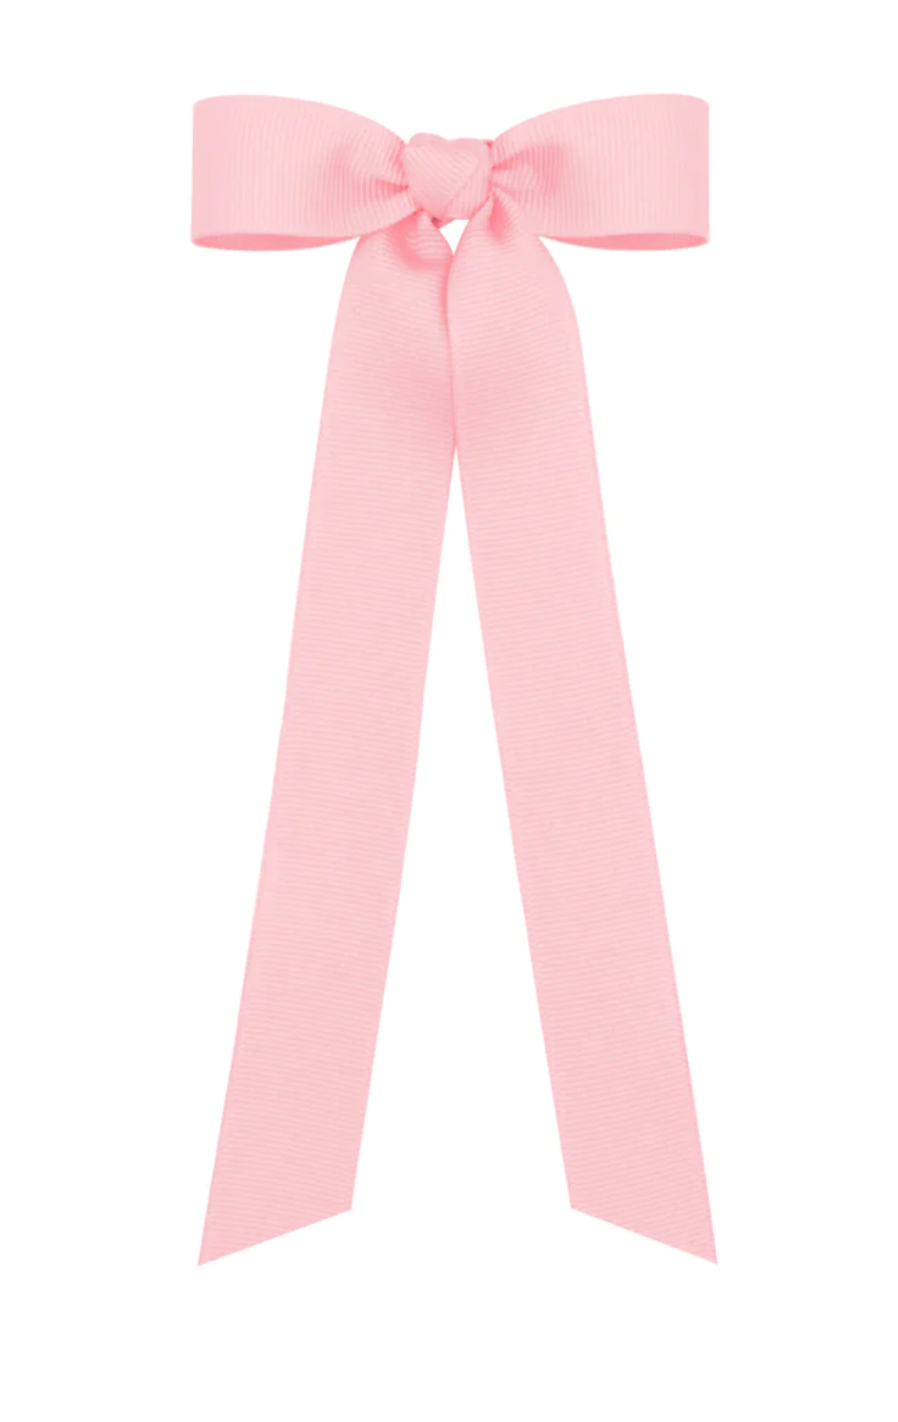 Light Pink Hair Bowtie with Knot Streamer